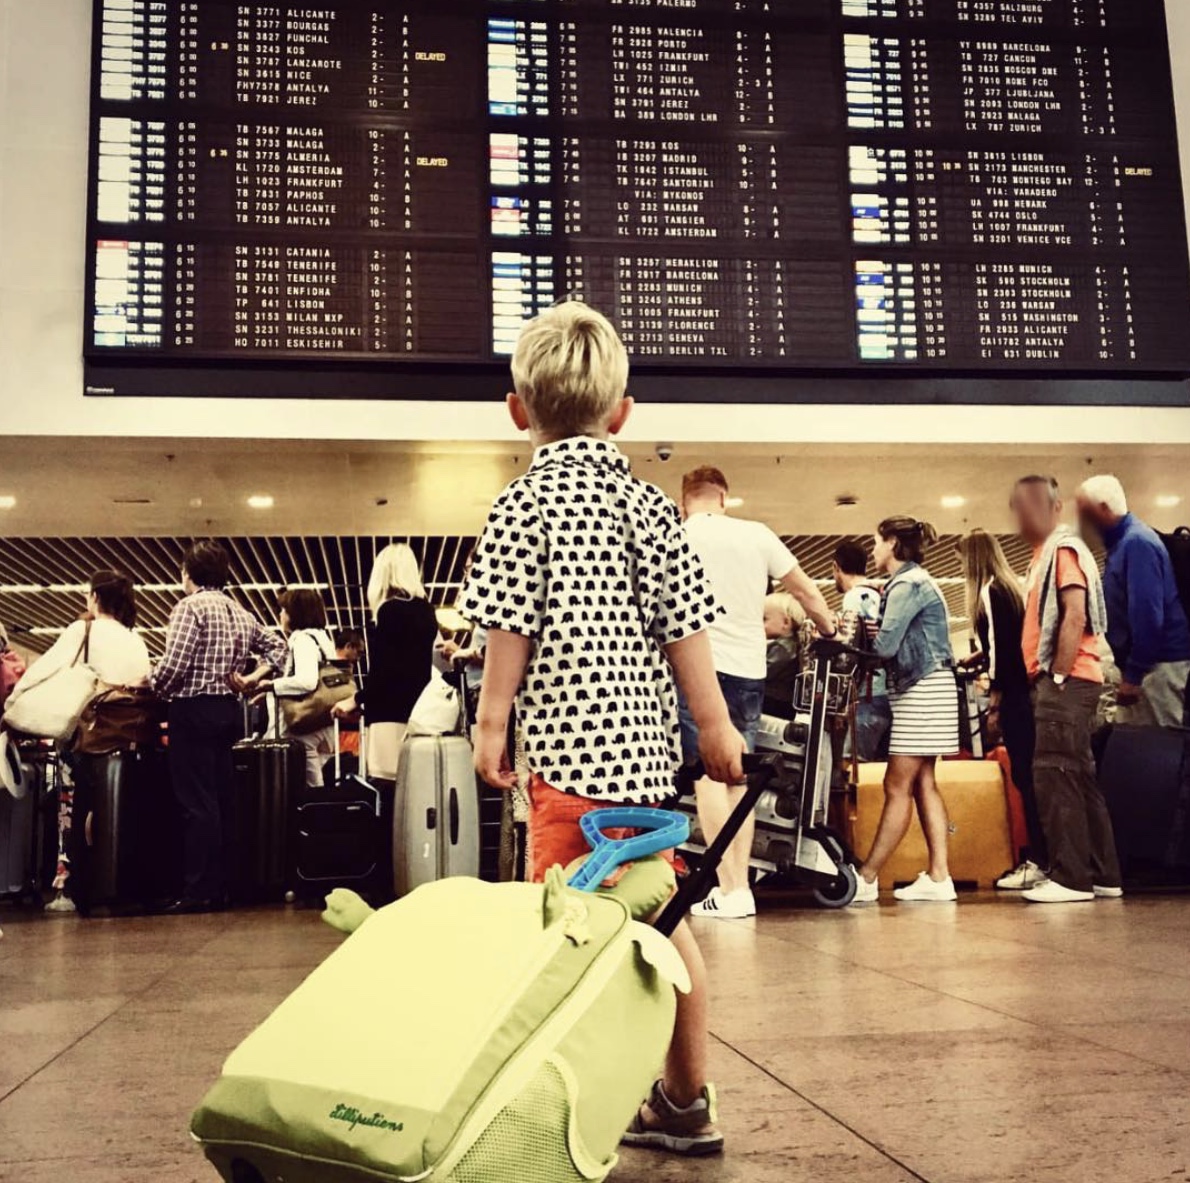 Record Number Of Passengers At Brussels Airport In First Half Of